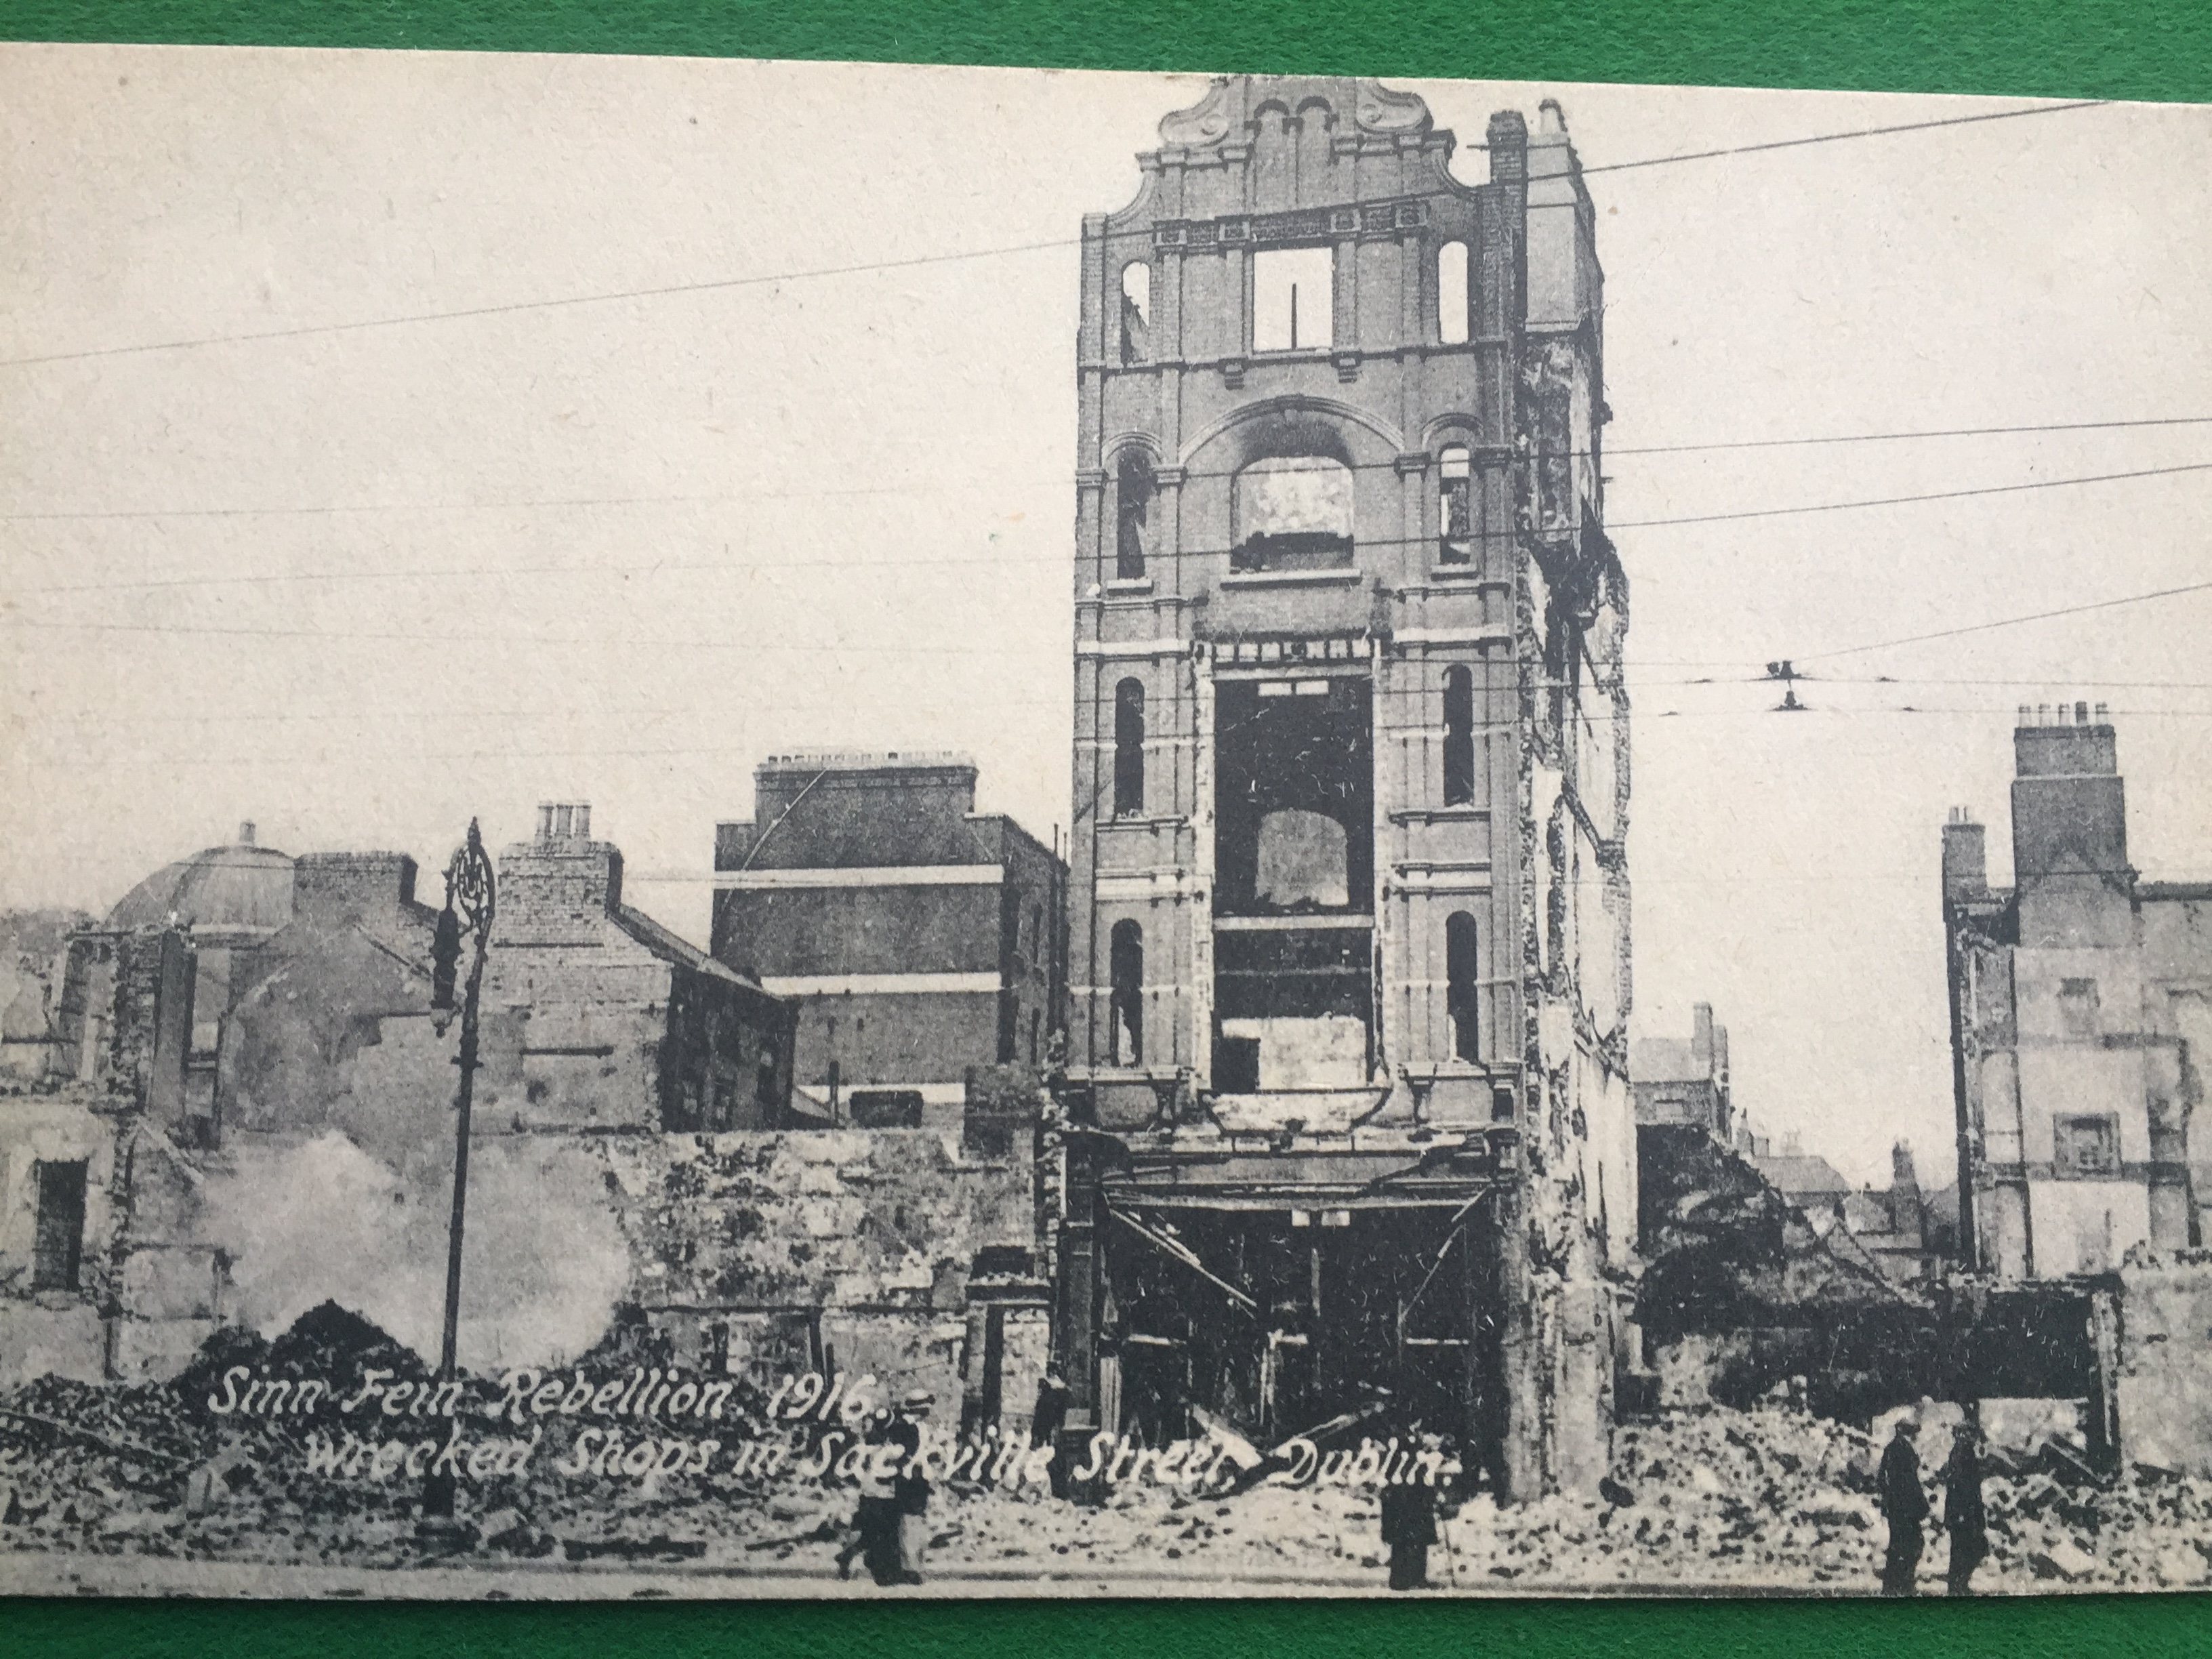 Marvellous detail showing the damage to the premises during the fighting around the GPO. 